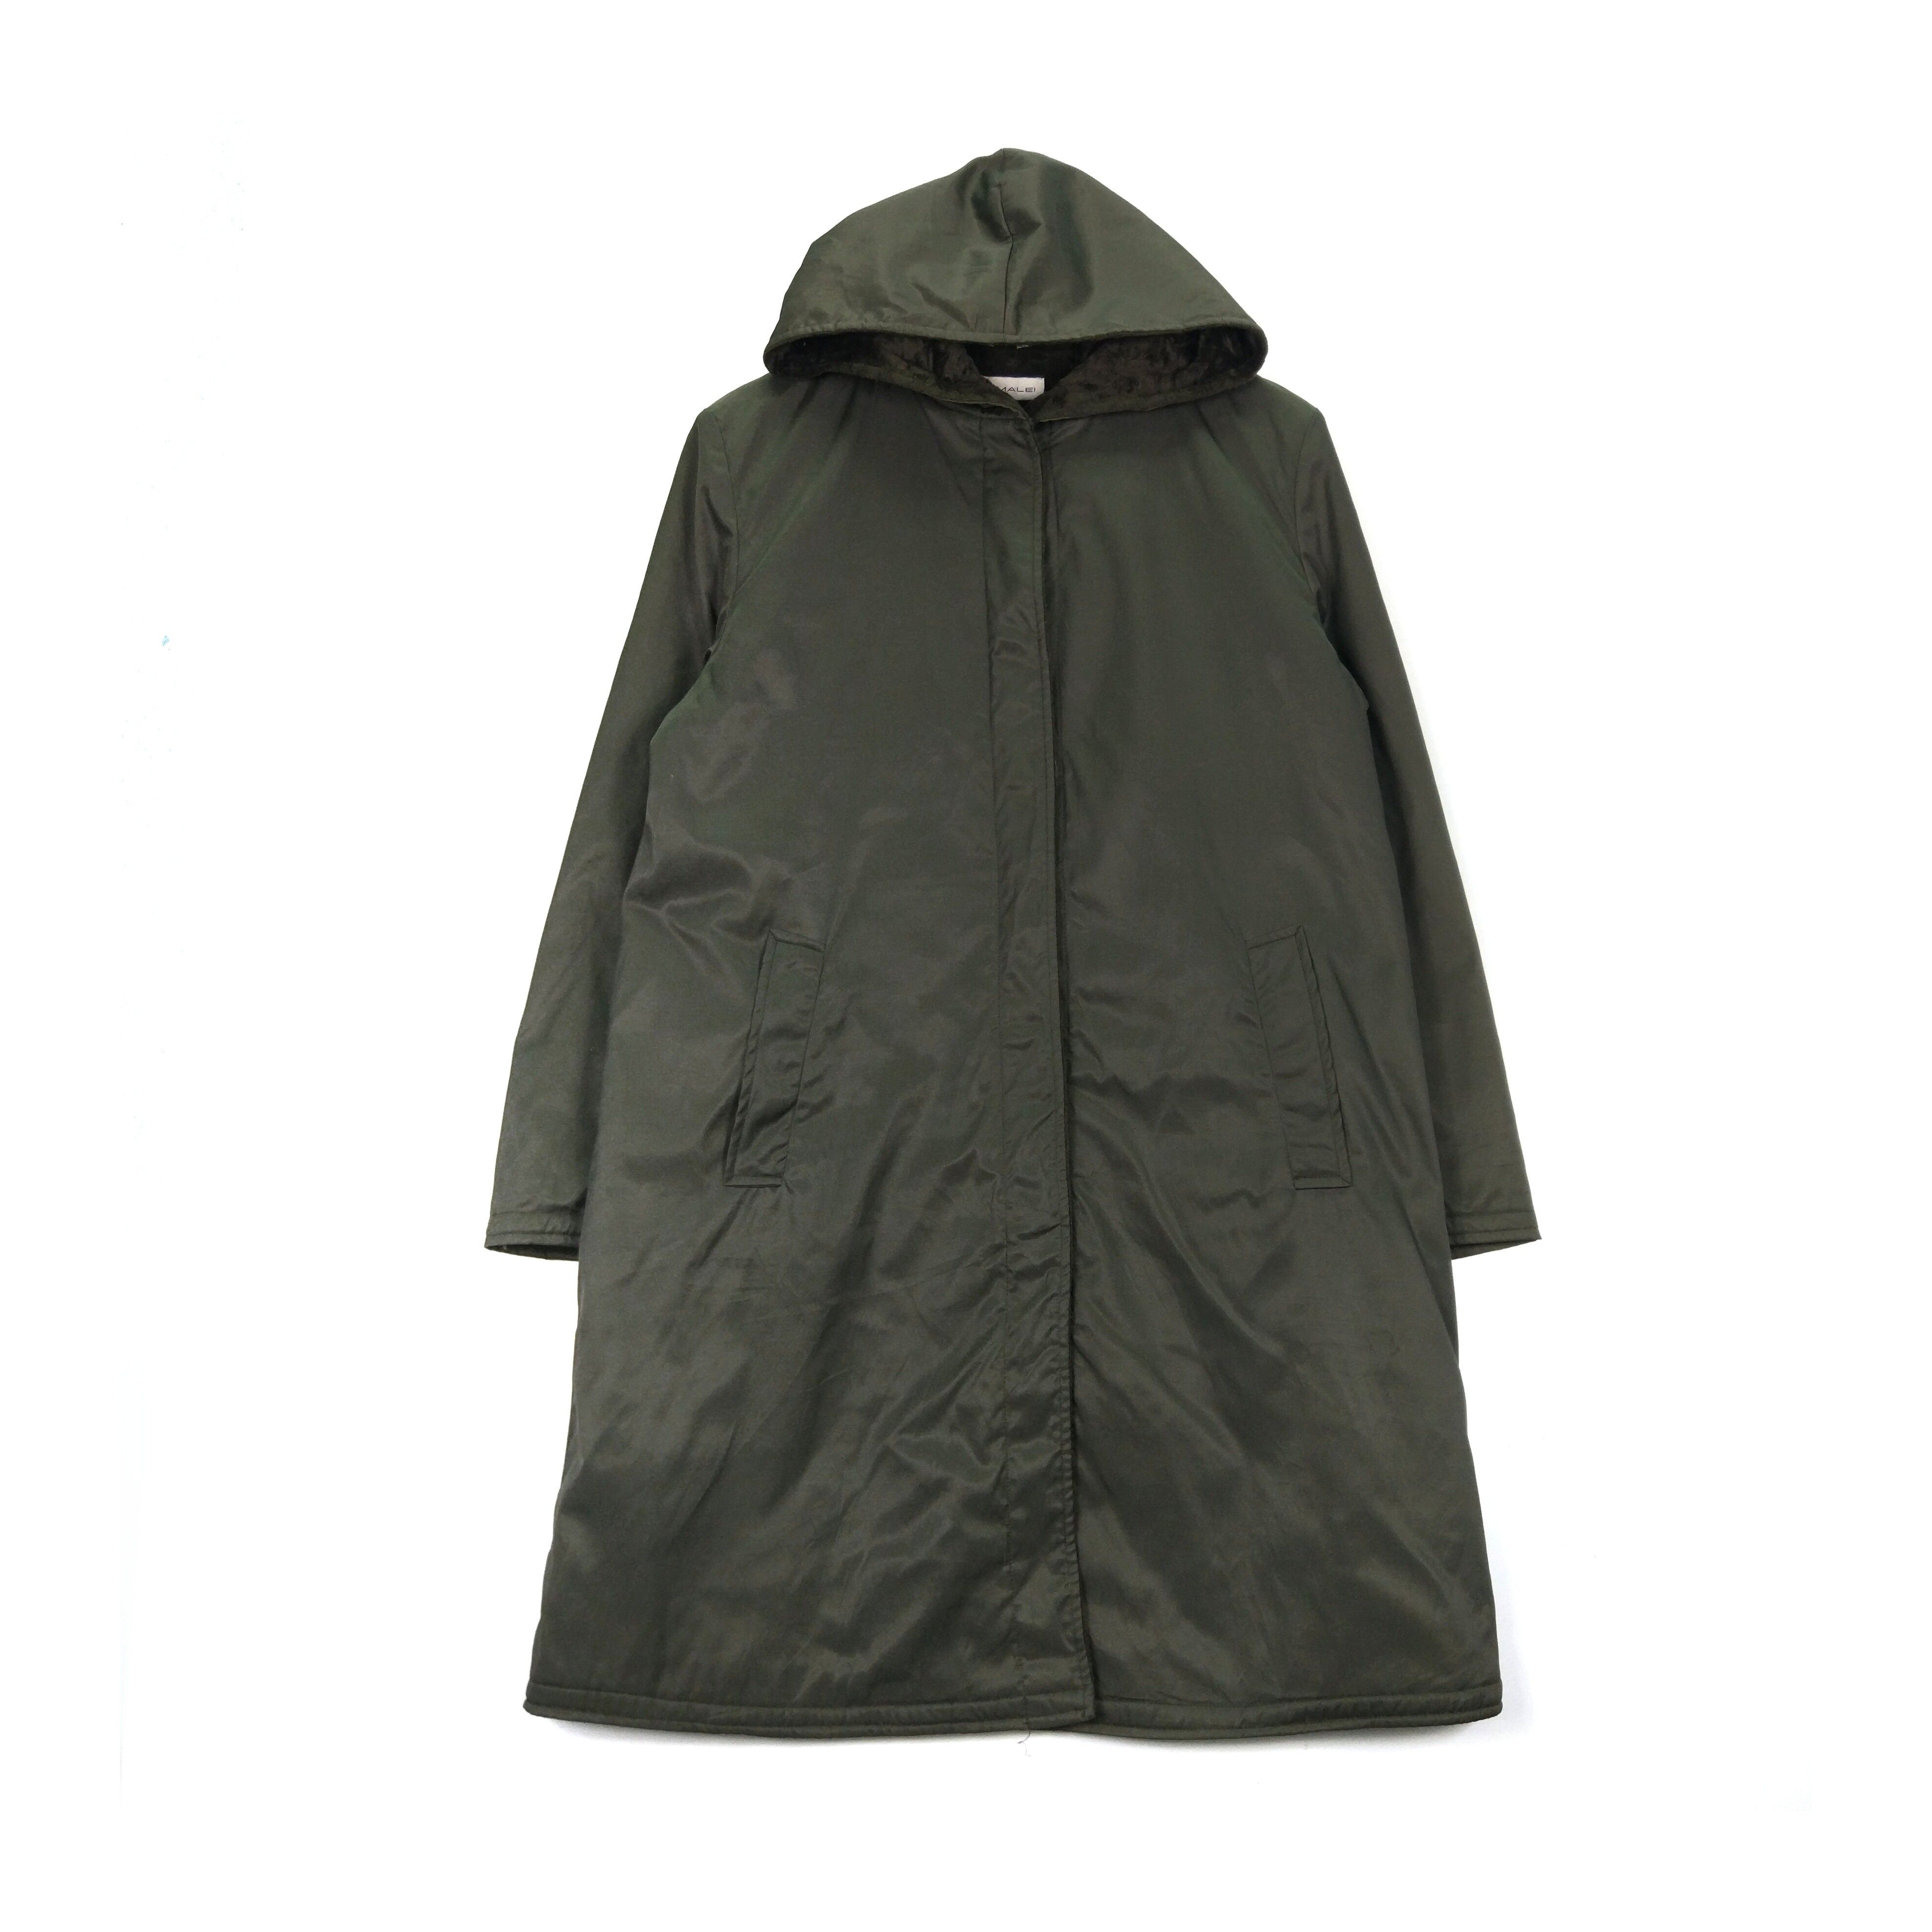 Designer - PRISMALEI Green Army Parkas Long Jacket Made in Italy - 1